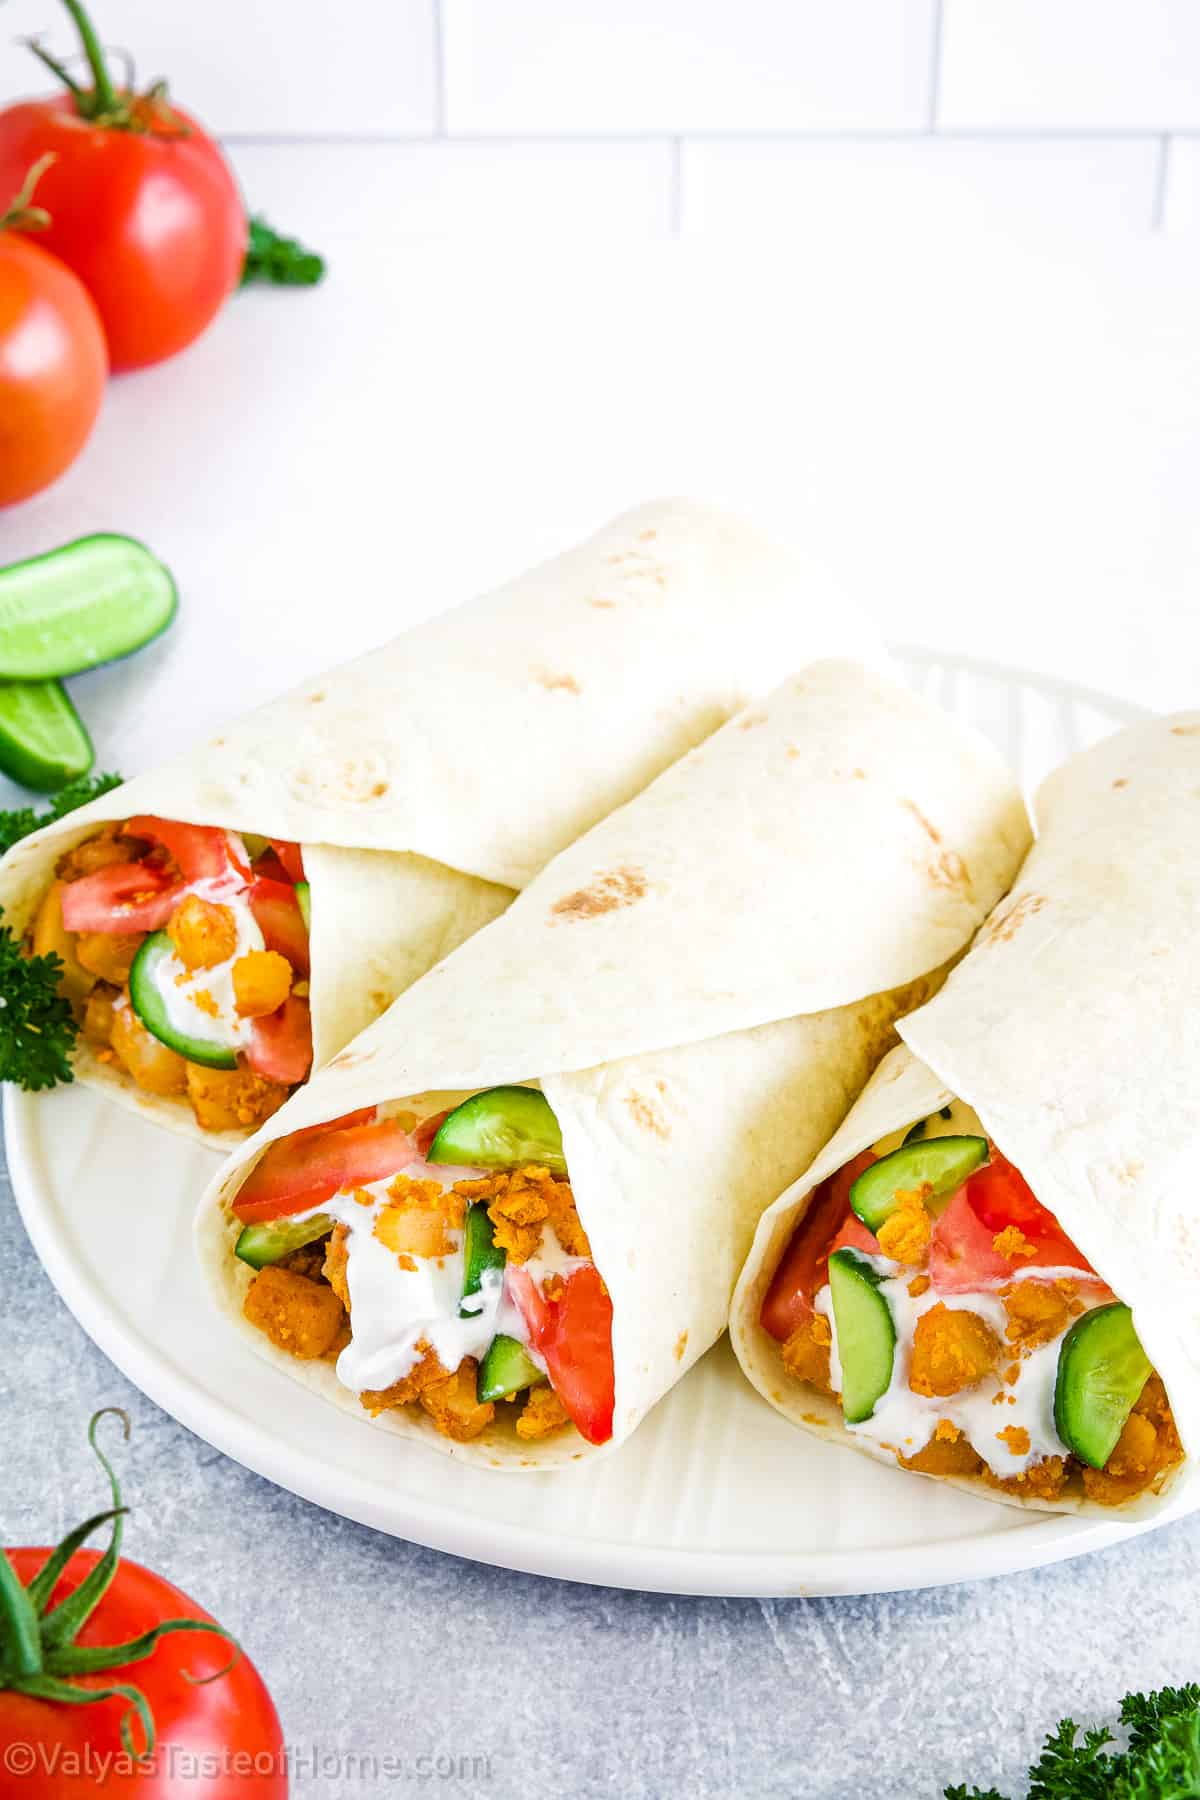 These Breakfast Tacos are the perfect way to start your day with a satisfying and delicious meal.